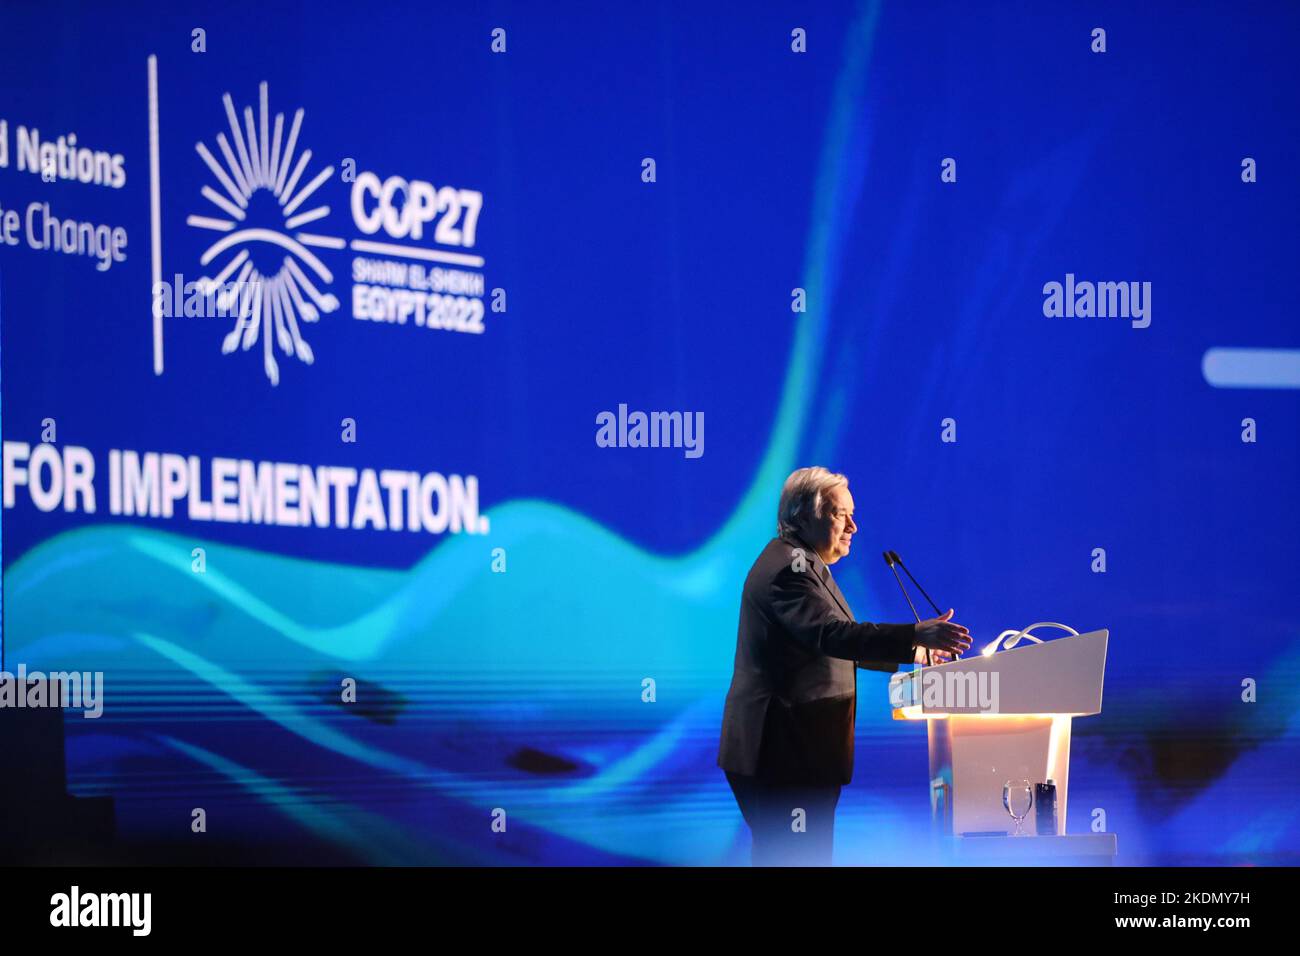 (221107) -- SHARM EL-SHEIKH (EGYPT), Nov. 7, 2022 (Xinhua) -- United Nations Secretary-General Antonio Guterres addresses the opening of the Sharm El-Sheikh Climate Implementation Summit (SCIS) during the 27th session of the Conference of the Parties (COP27) in Sharm El-Sheikh, Egypt, on Nov. 7, 2022. Addressing the climate summit, Guterres warned global leaders of the current climate challenges. 'We are on a highway to climate hell with our foot still on the accelerator,' he said, adding 'the planet is fast approaching the tipping point that will make climate chaos irreversible.' (Xinhua/Sui Stock Photo